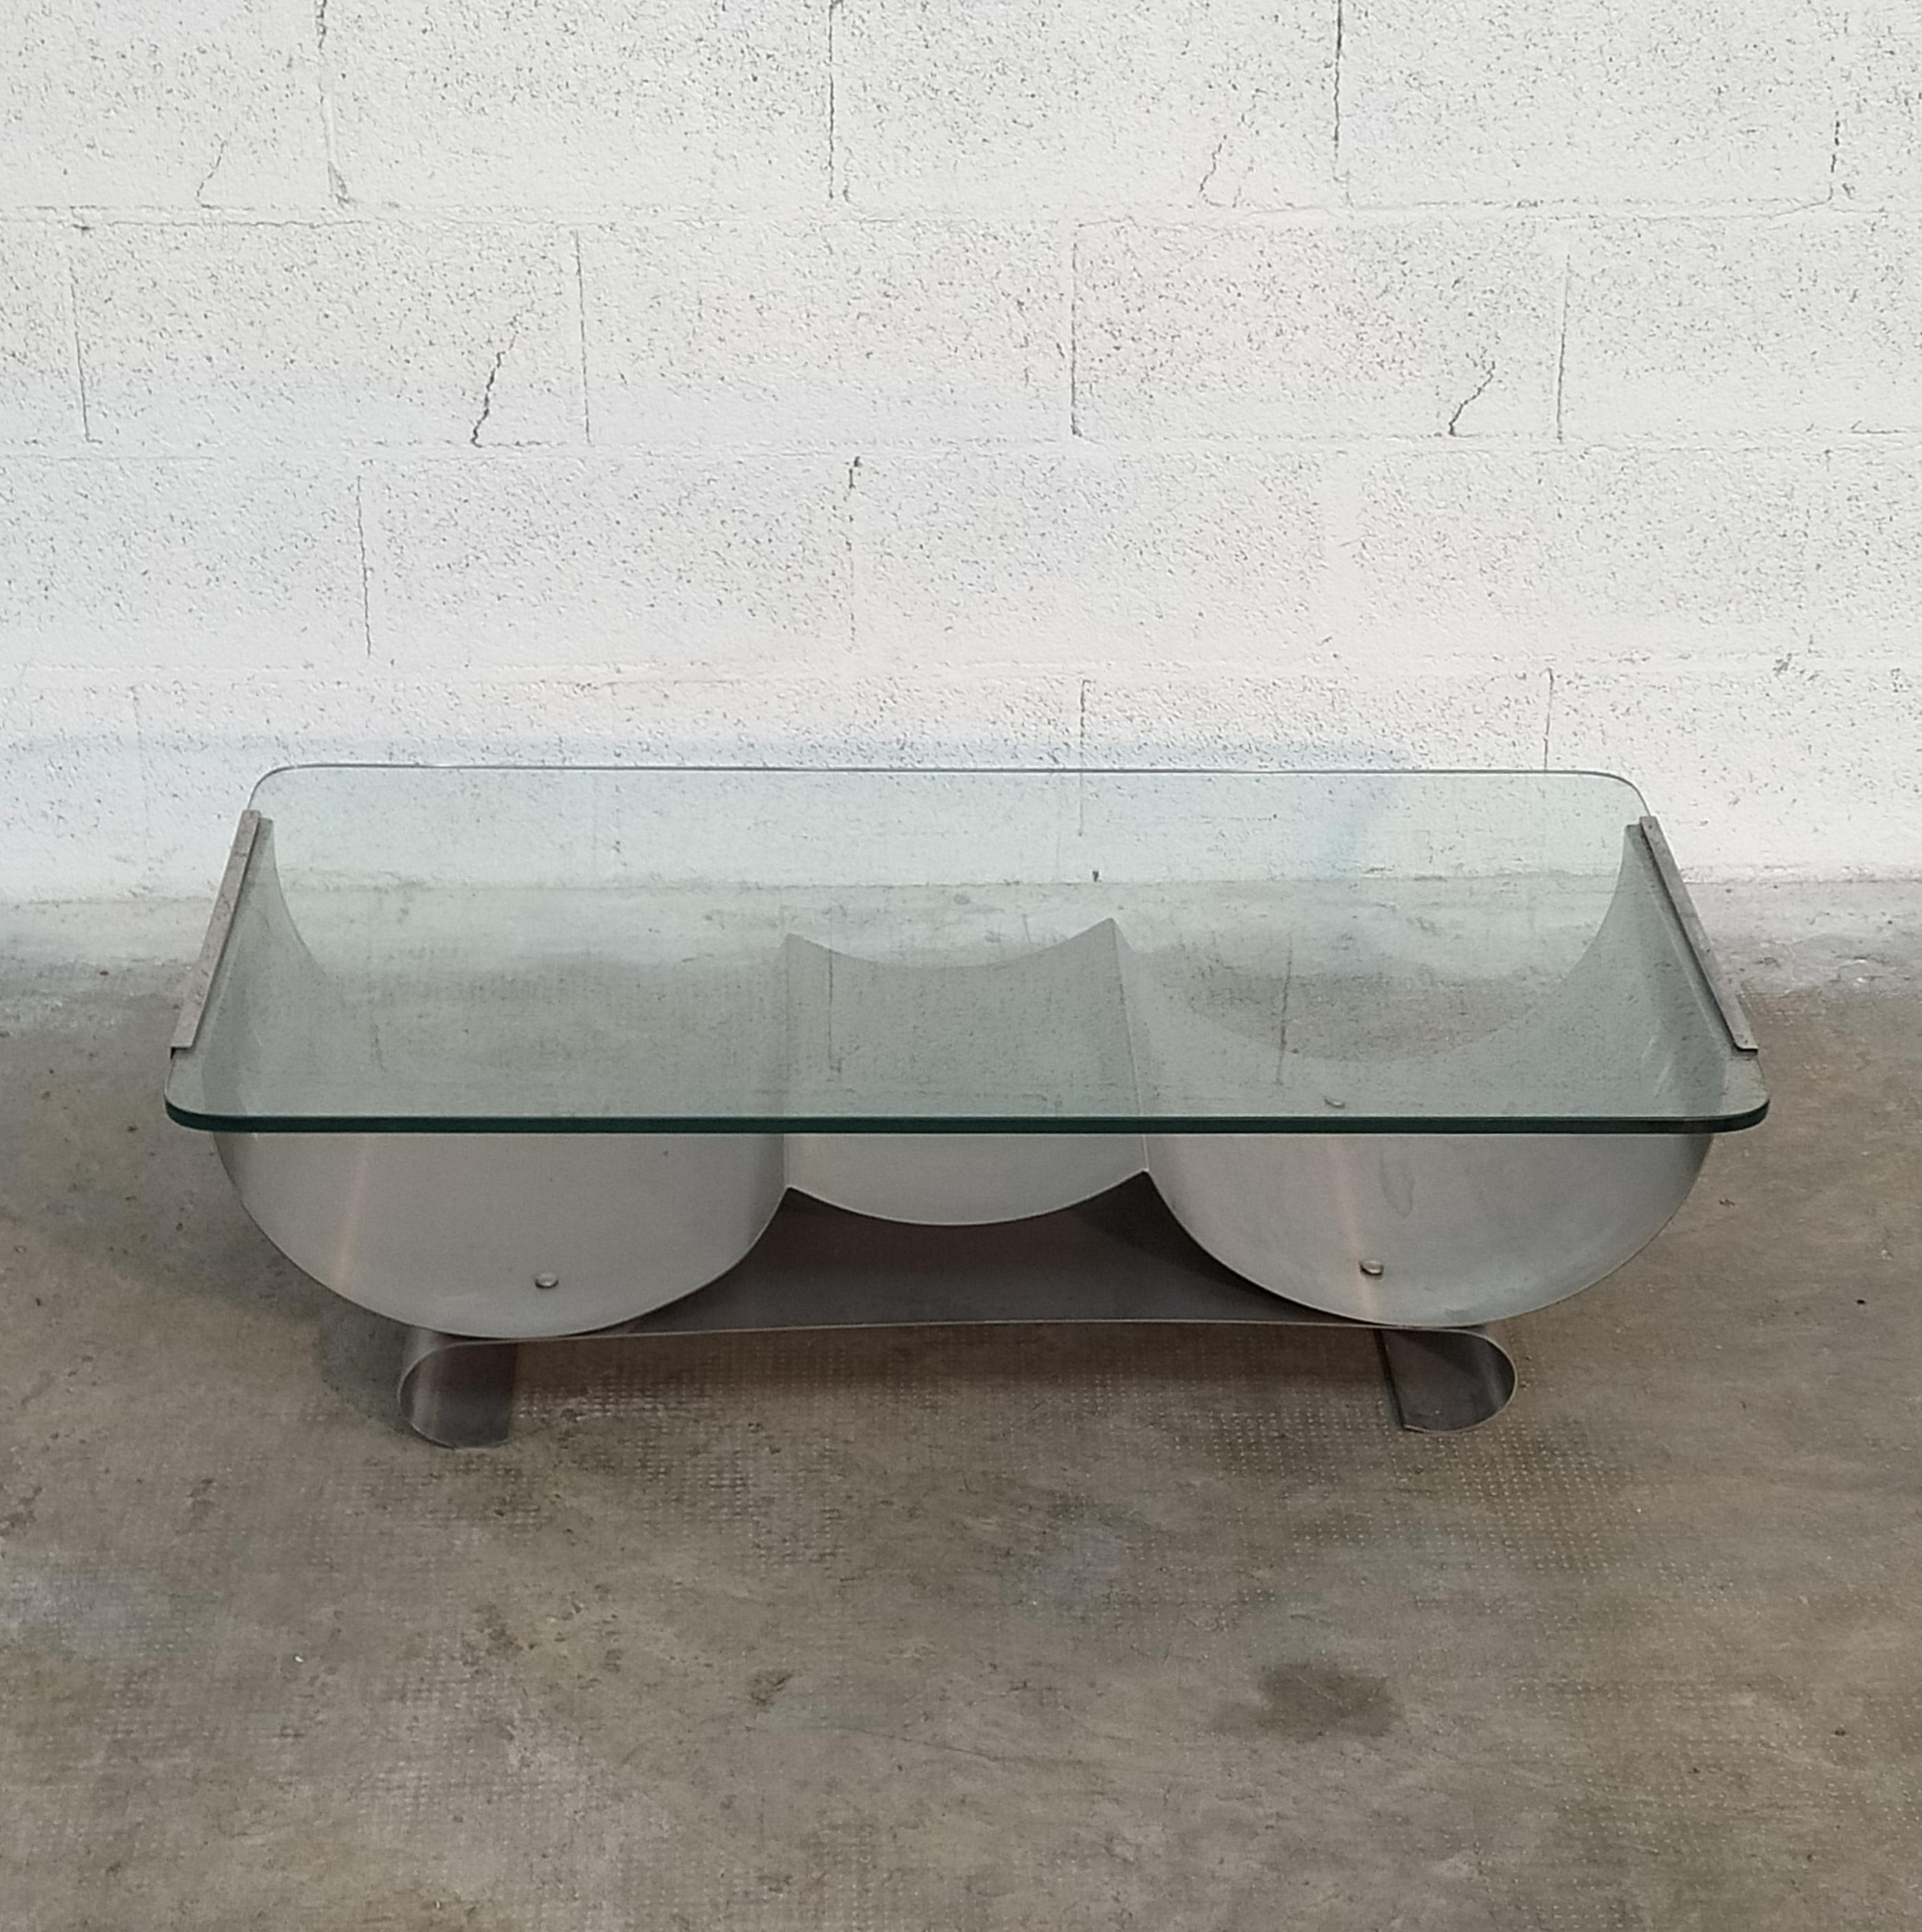 Stainless Steel and Glass Coffee Table by Francois Monnet for Kappa 70s For Sale 3